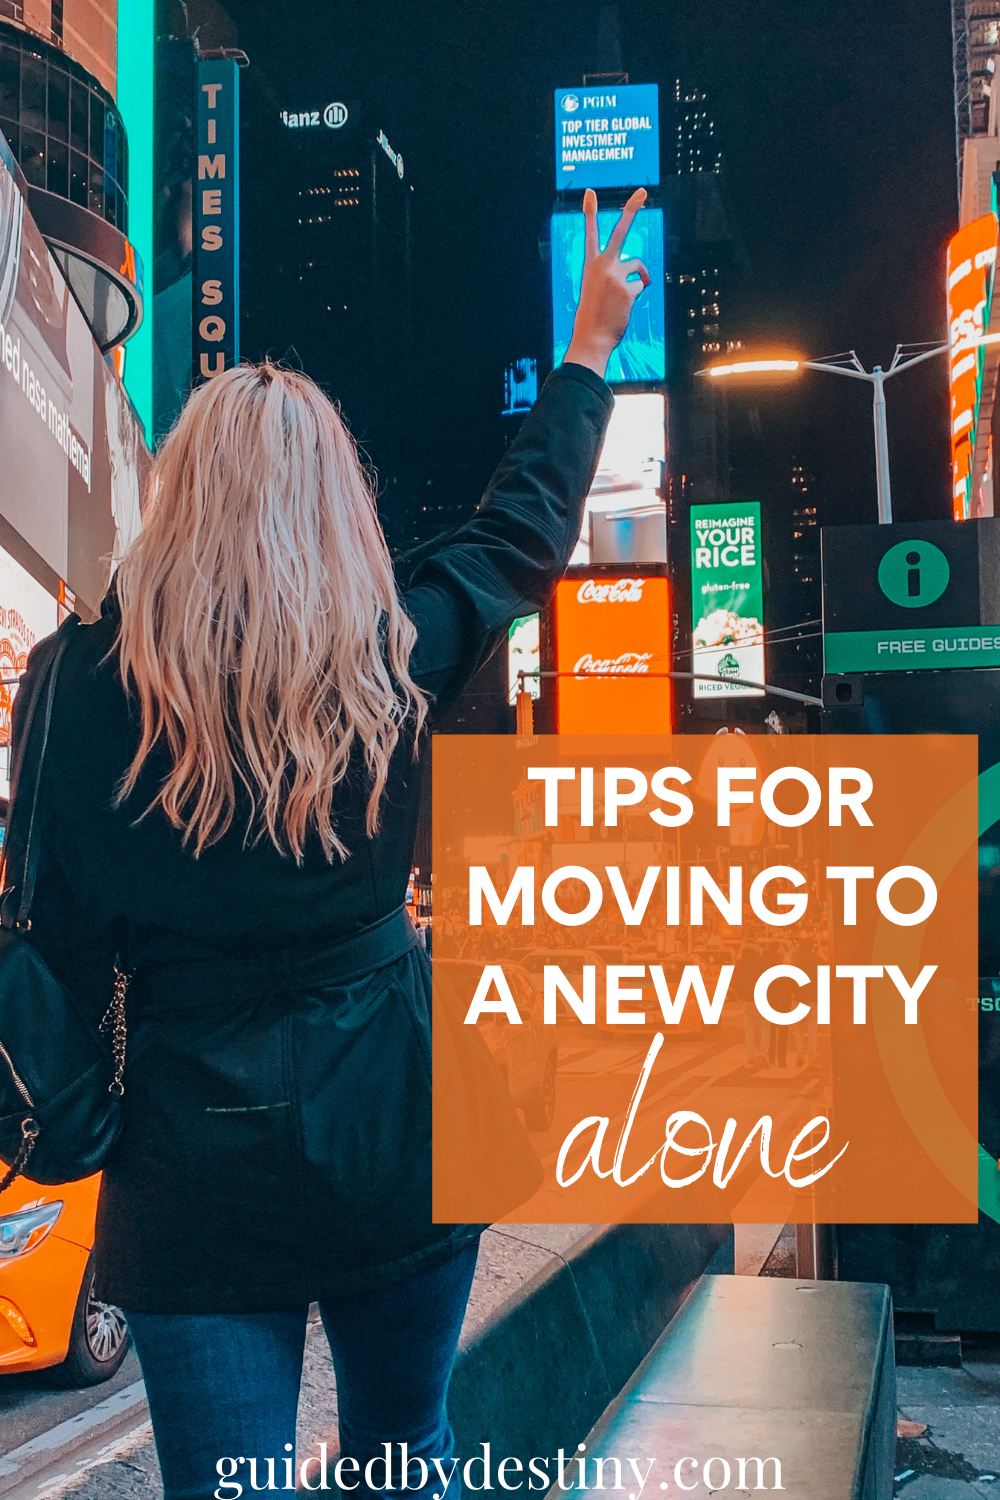 Tips for moving to a new city alone